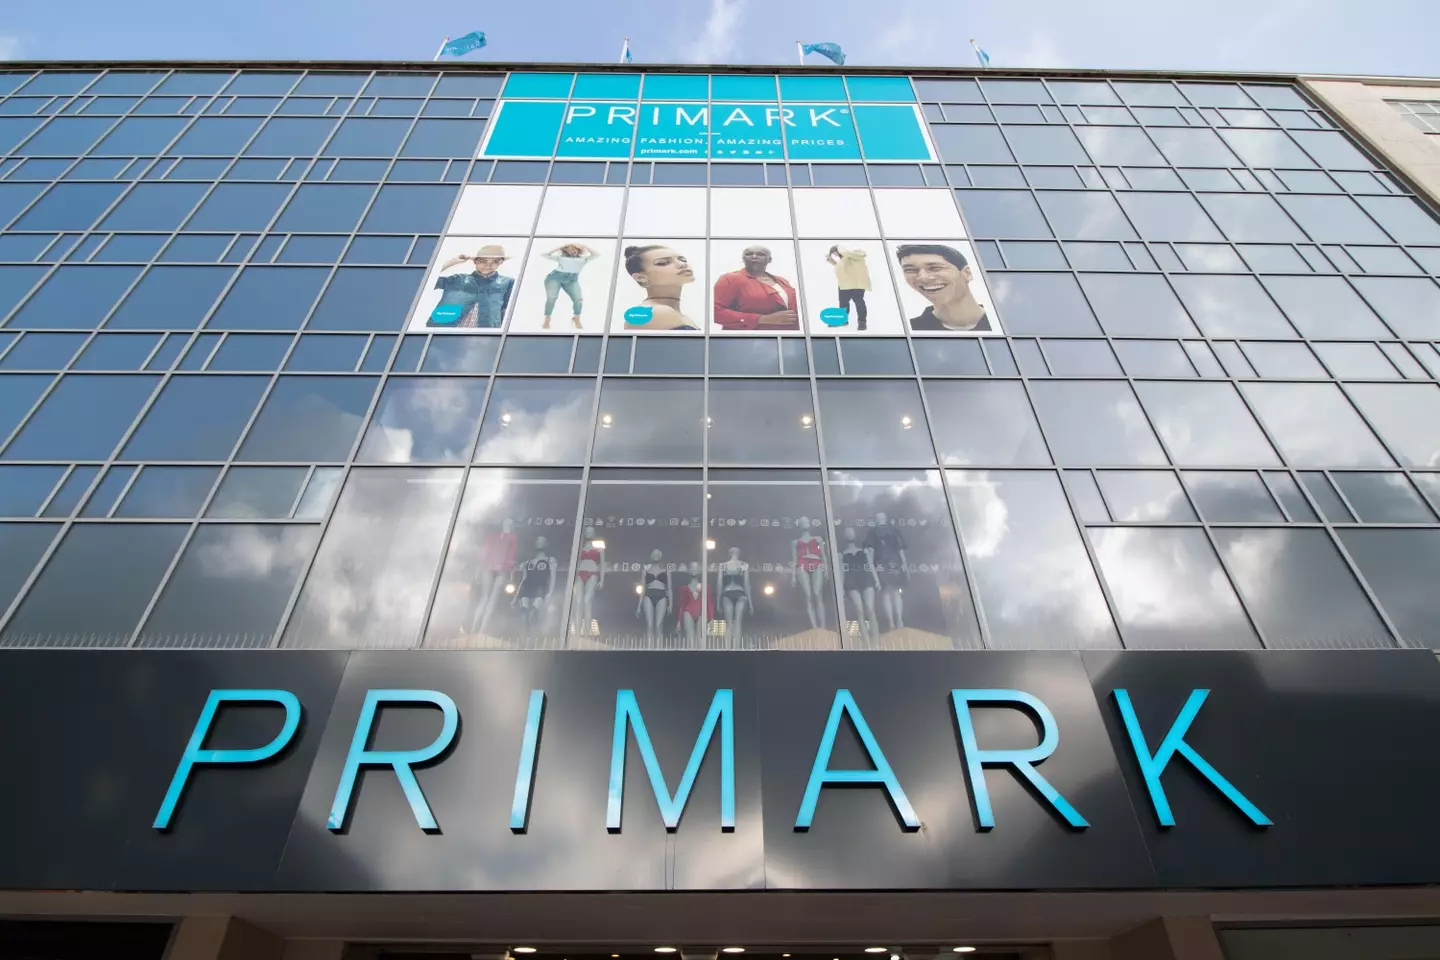 Primark will reintroduce fitting rooms for women.